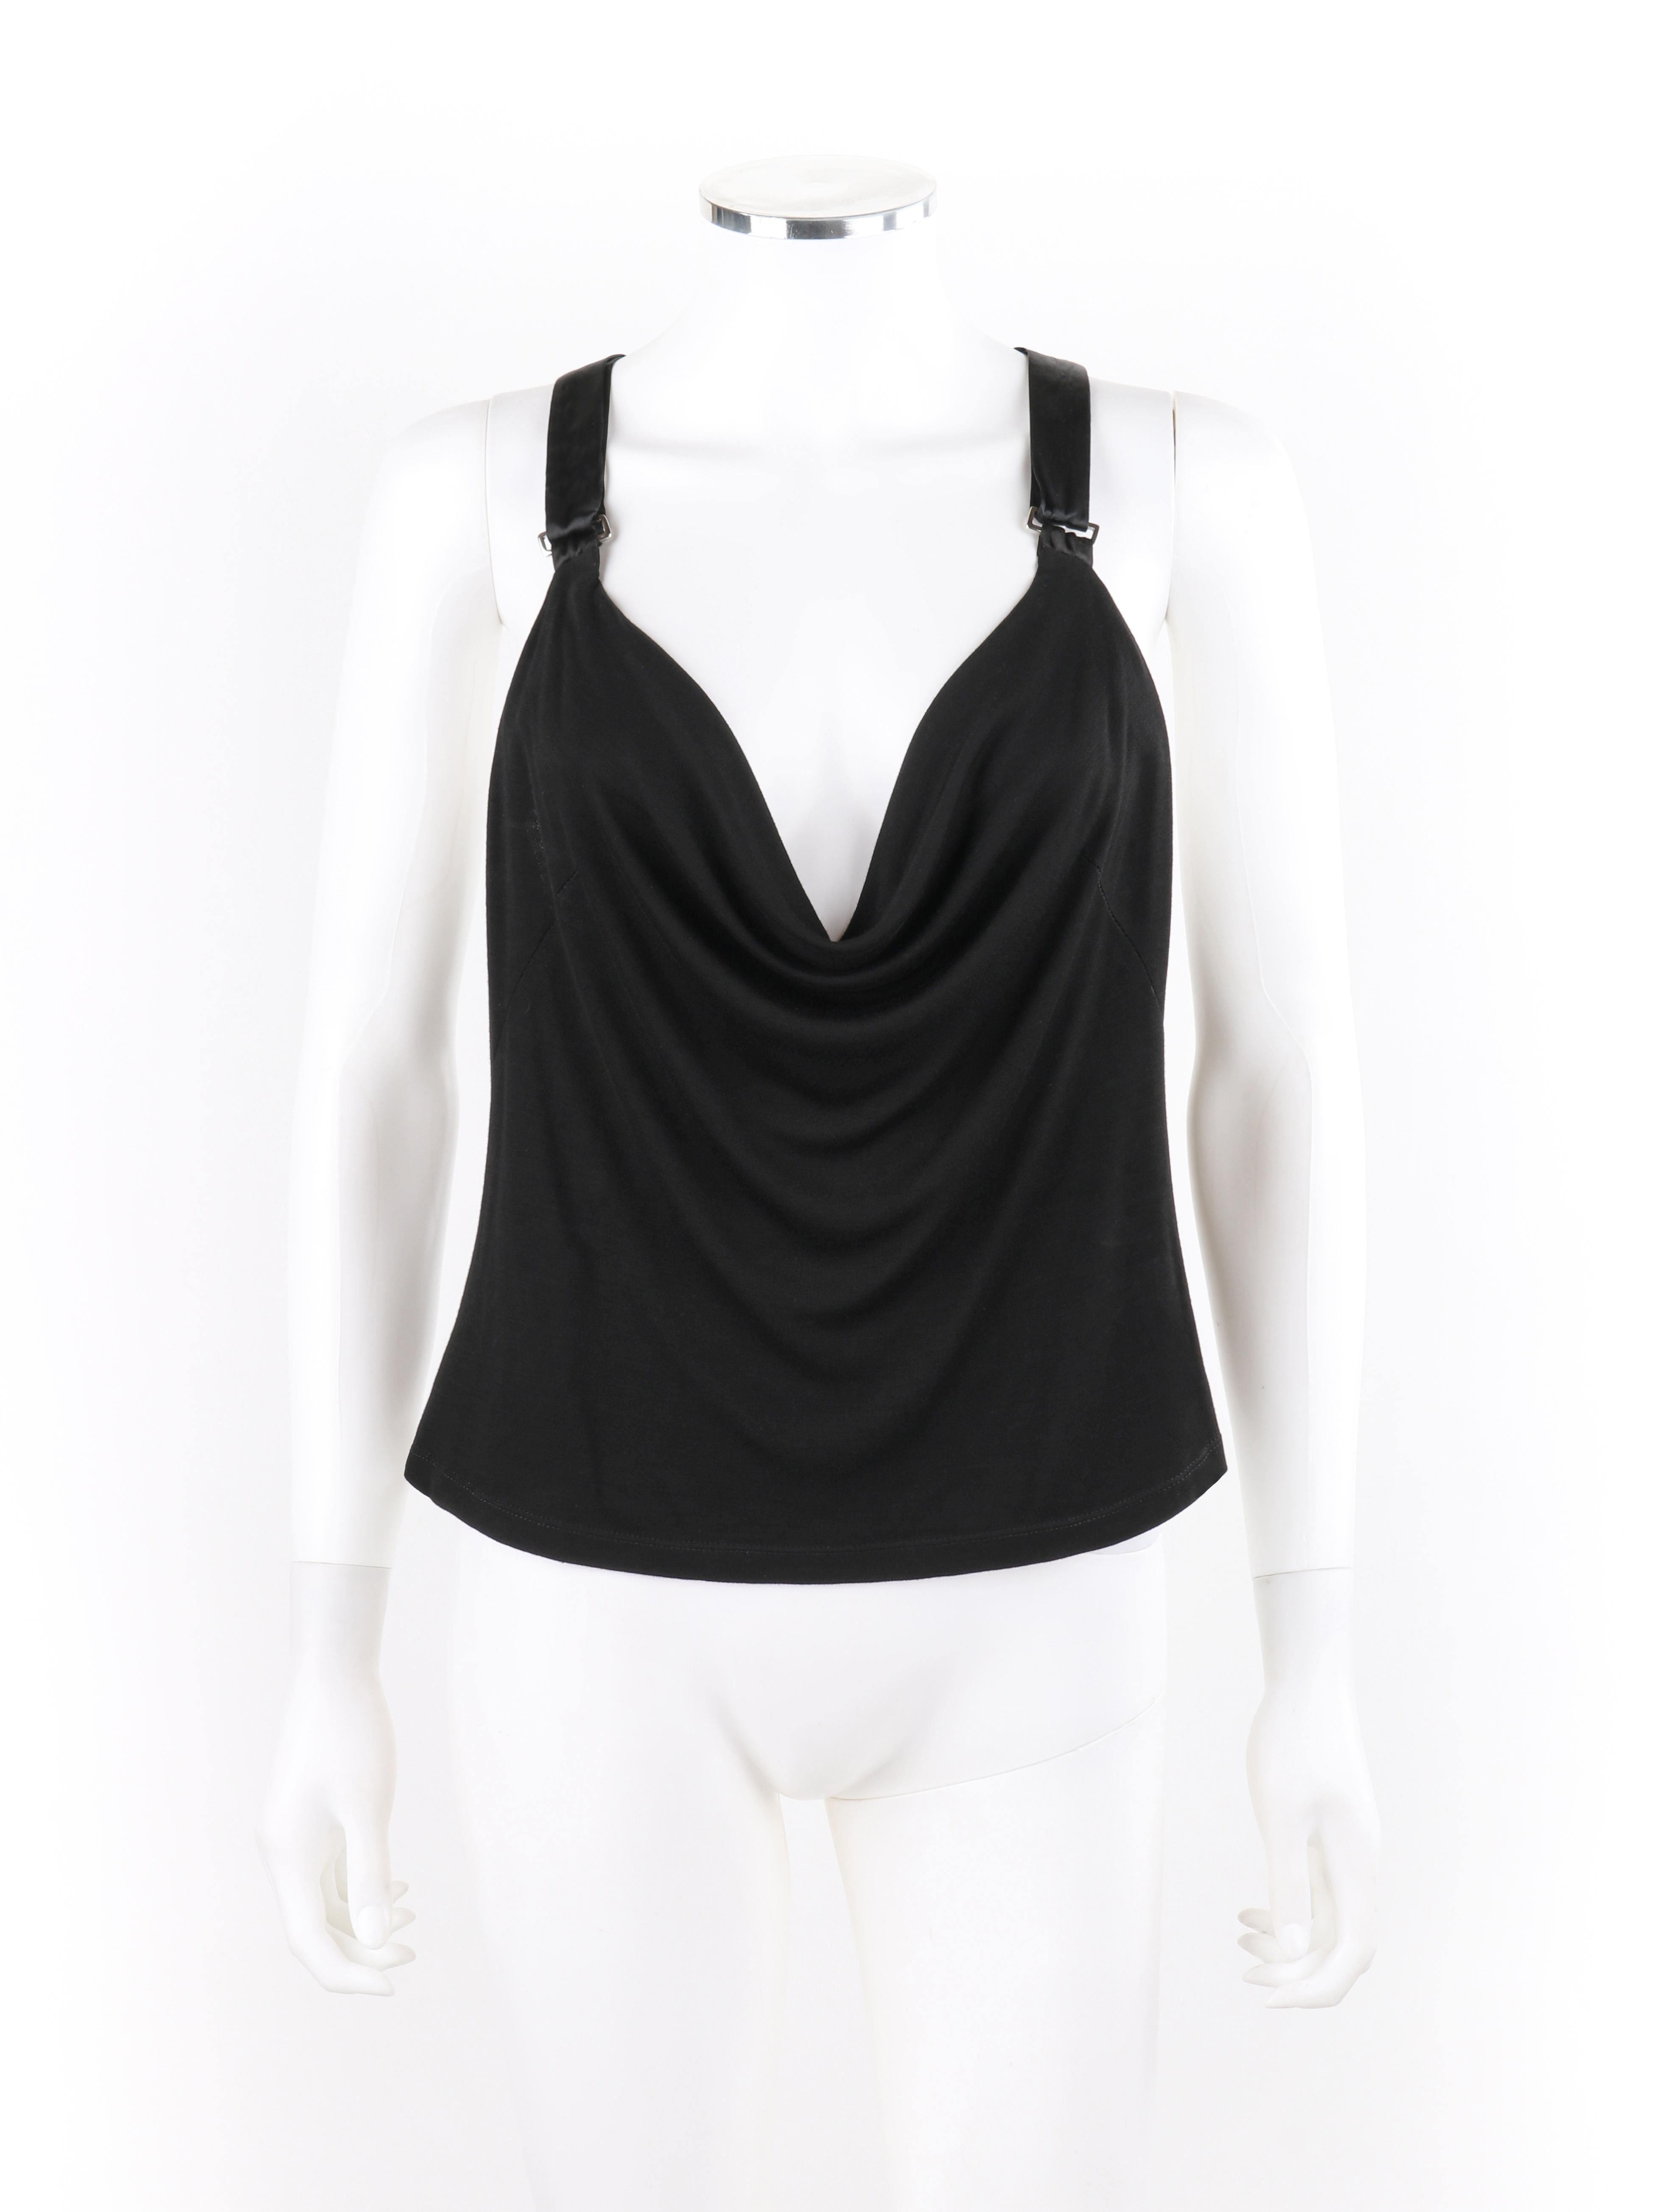 ALEXANDER McQUEEN S/S 2000 Knit Black Cowl Neck Satin Suspender Strap Tank Top
 
Brand / Manufacturer: Alexander McQueen
Collection: S/S 2000
Style: Tank top
Color(s): Shades of black and silver
Lined: No
Unmarked Fabric Content (feel of): Polyester